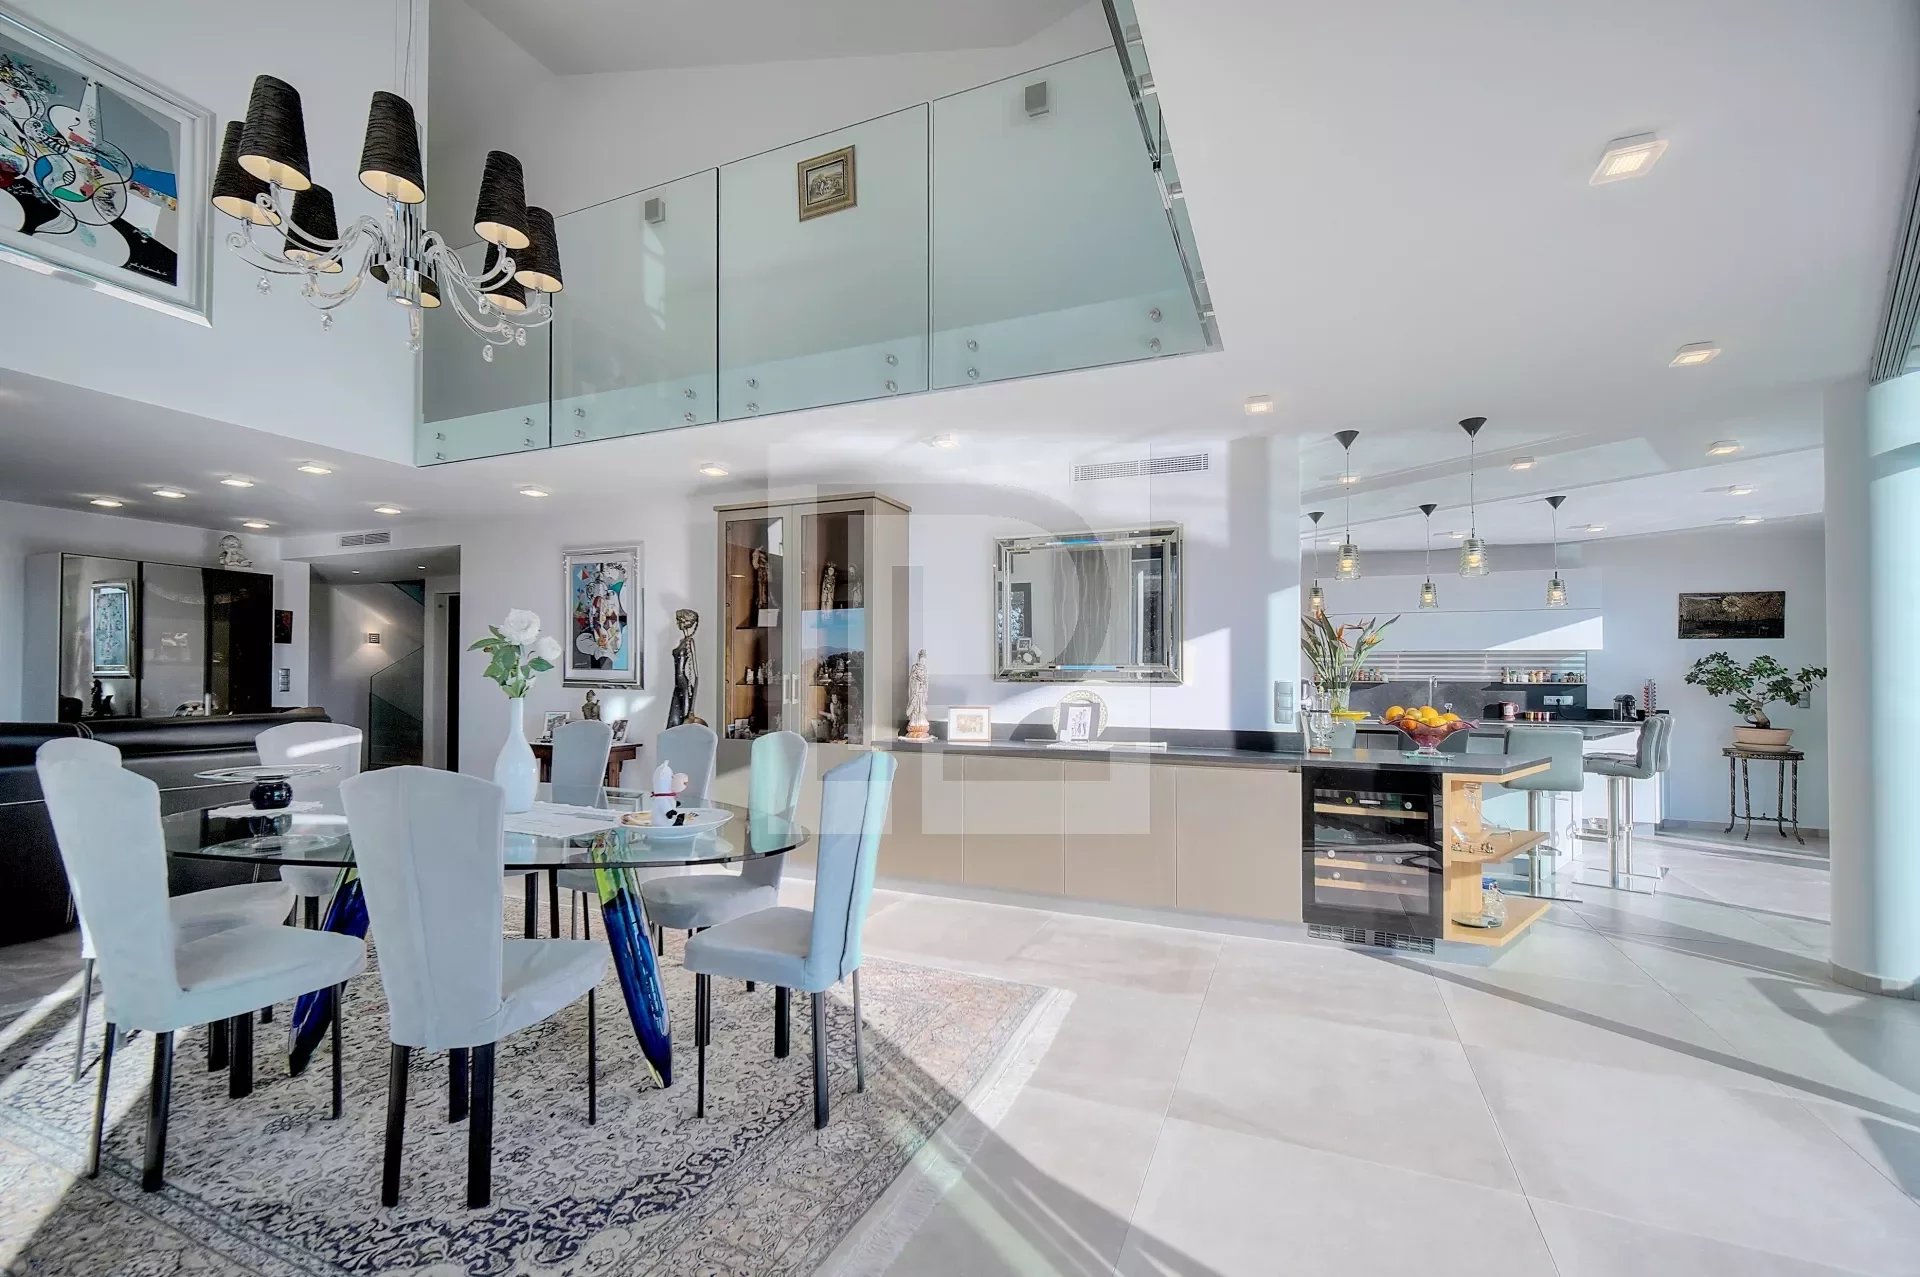 Contemporary villa at 10 minutes from life in Cannes